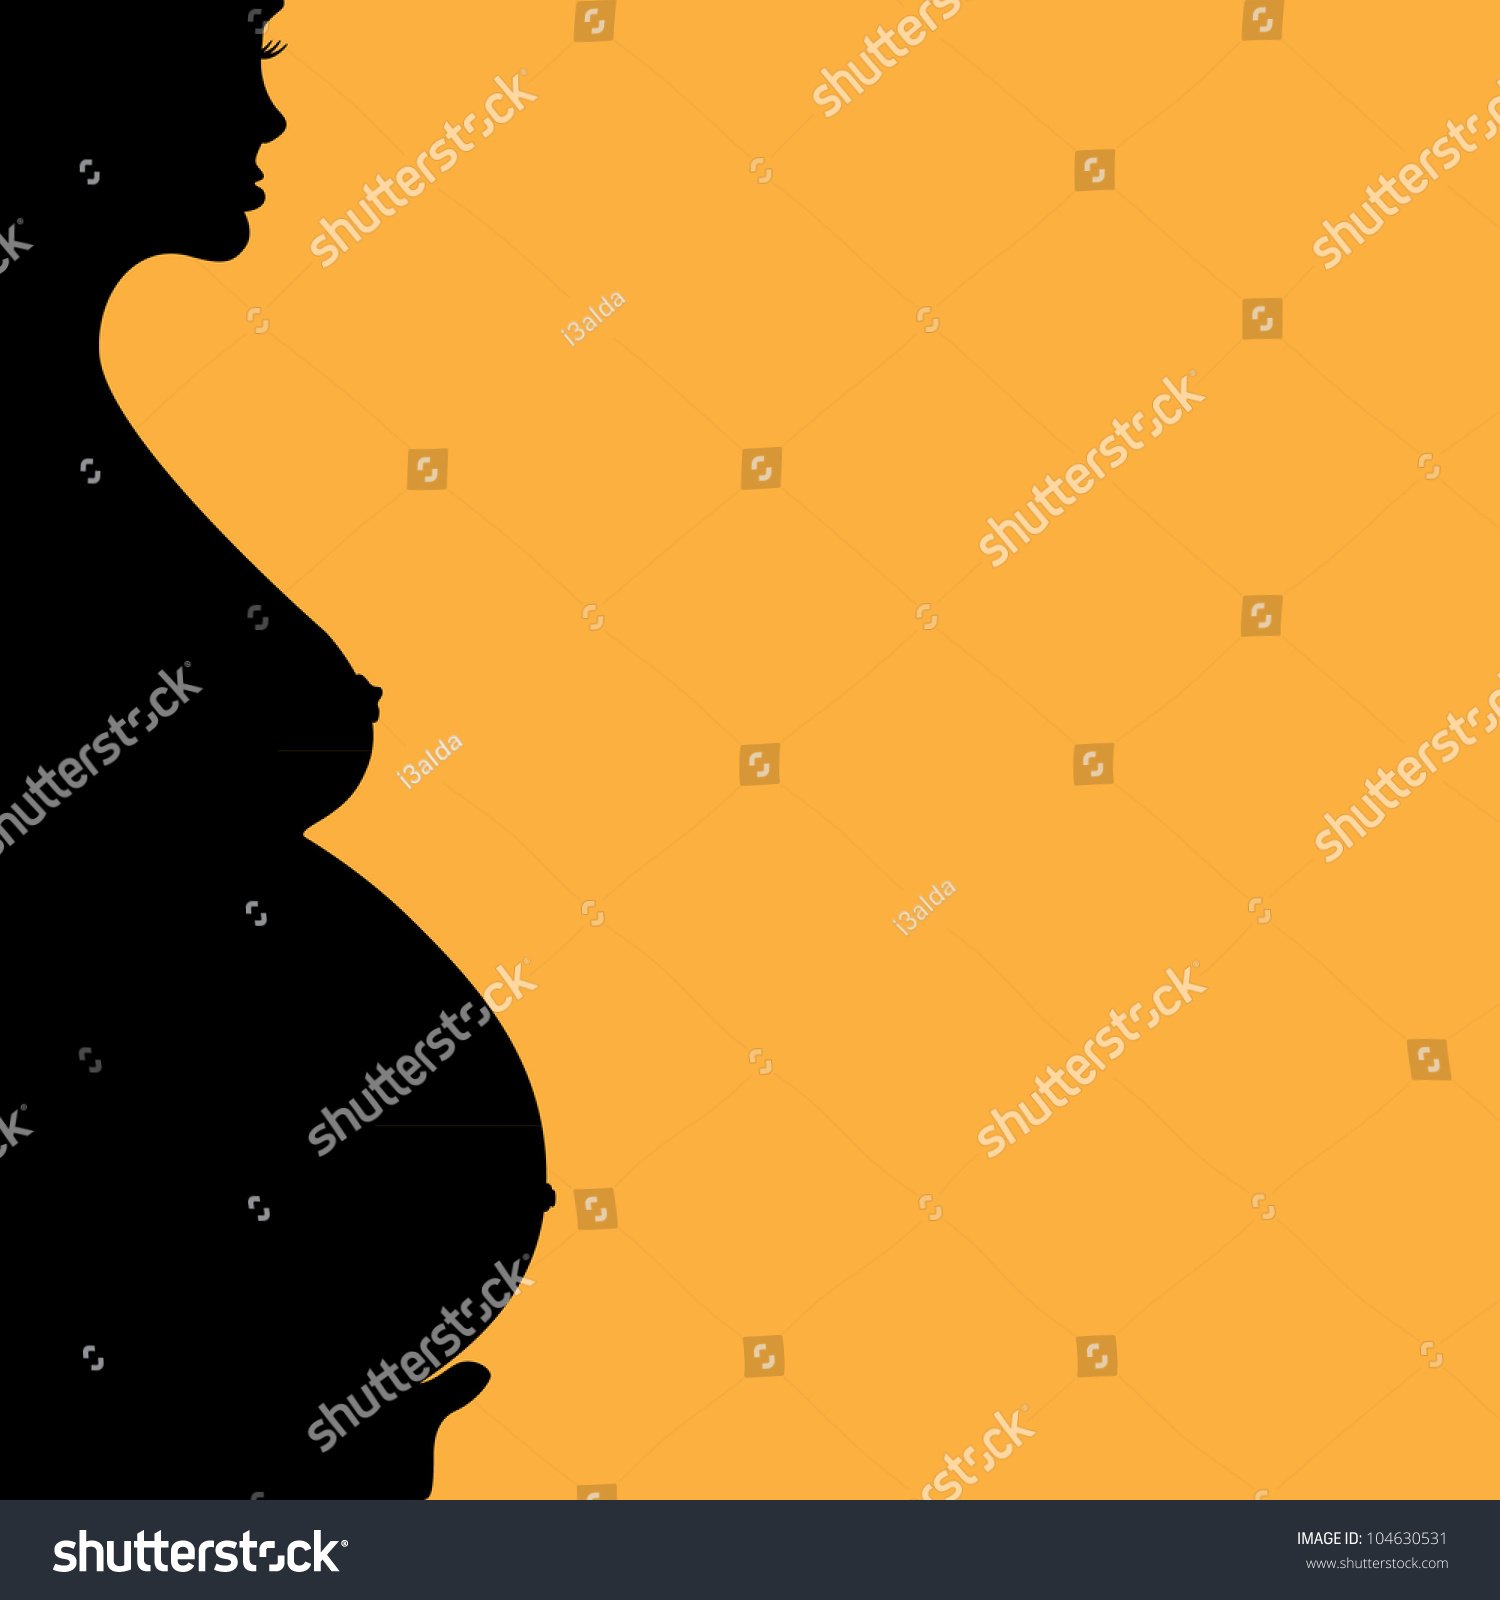 Pregnant Naked Woman Silhouette Illustration Stock Vector Royalty Free